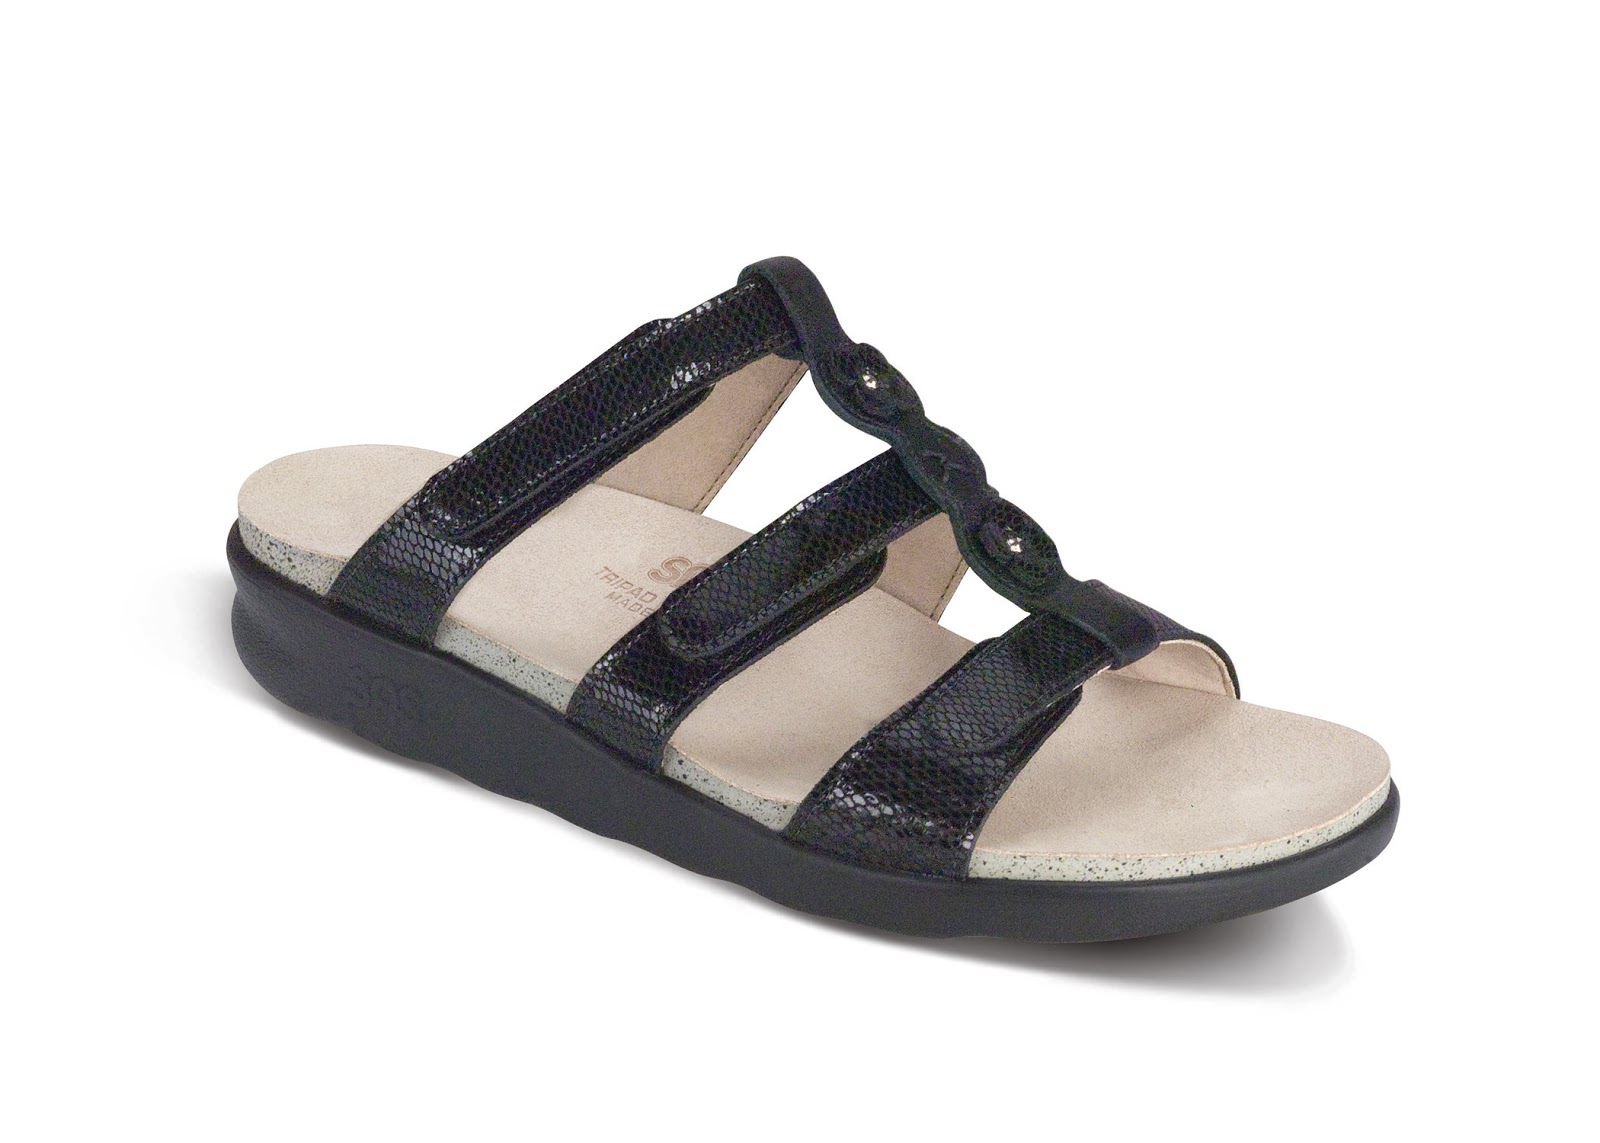 Ensor's Comfort Shoes - Betty's Blog: BEAUTIFUL SANDALS by SAS®